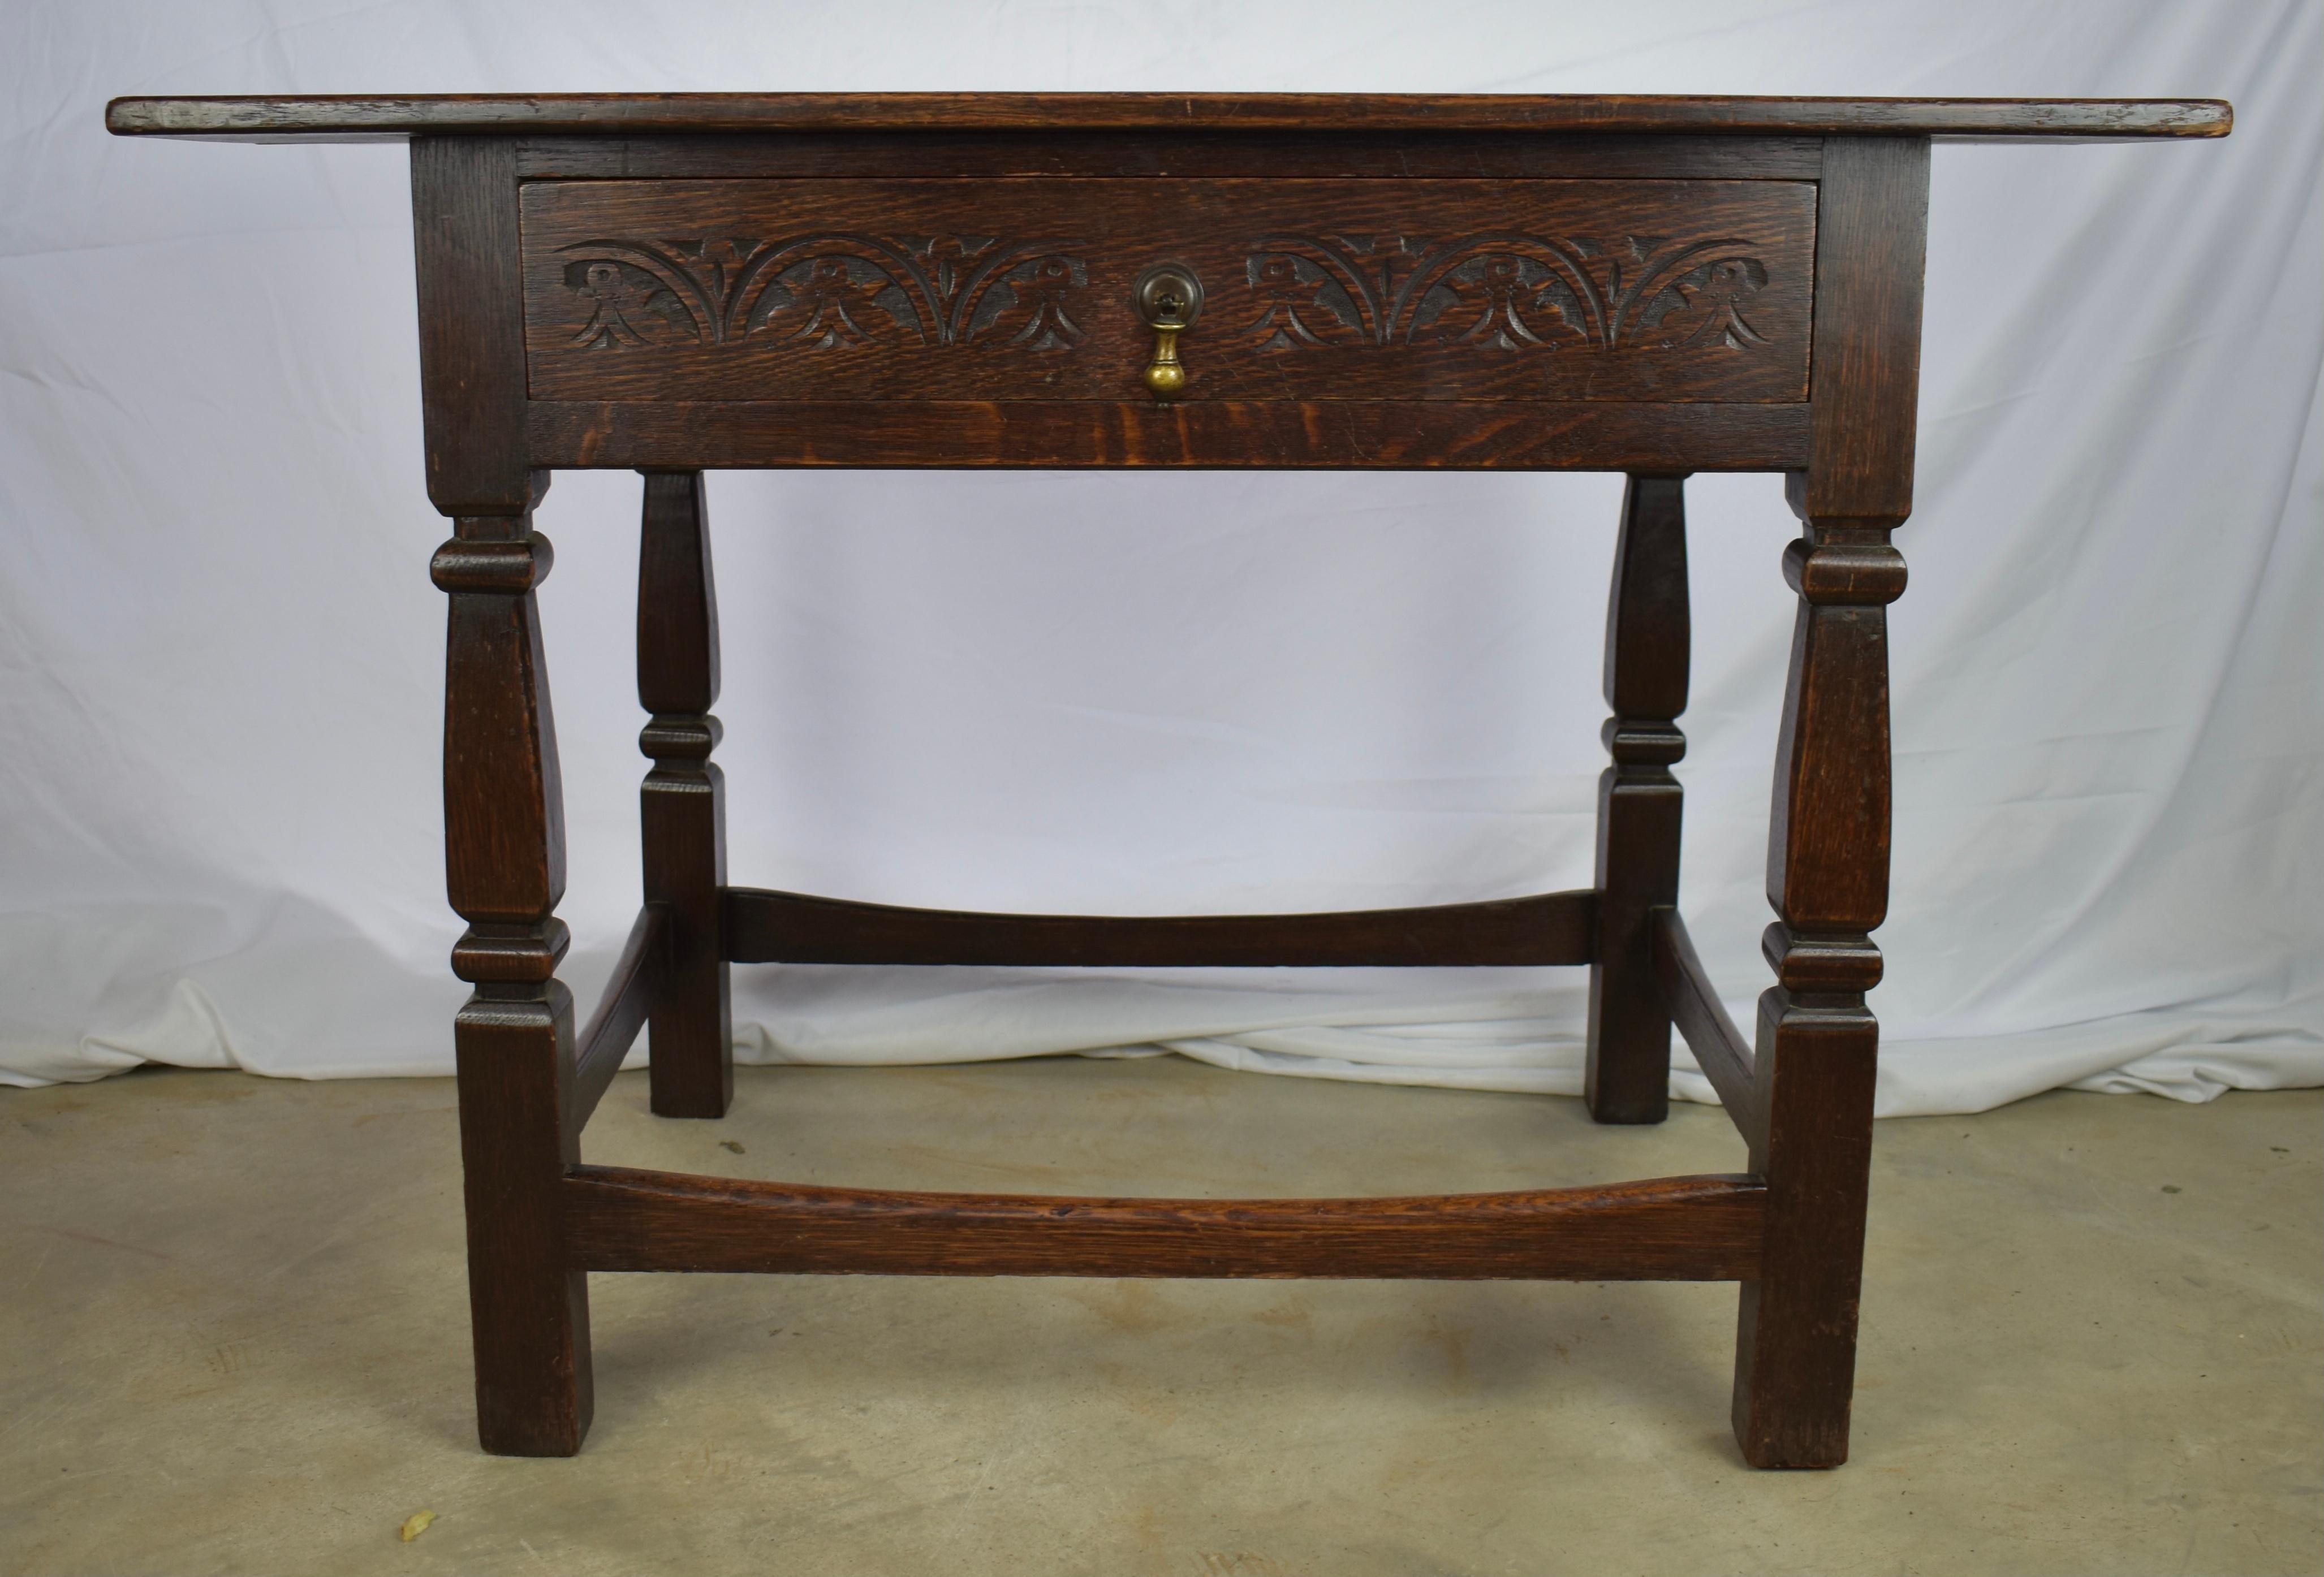 Oak side table built in England in the late 1800s in the William and Mary style using dovetail construction. The table is rectangular in shape and features a large single drawer on the front, delicately decorated with symmetrically hand-carved